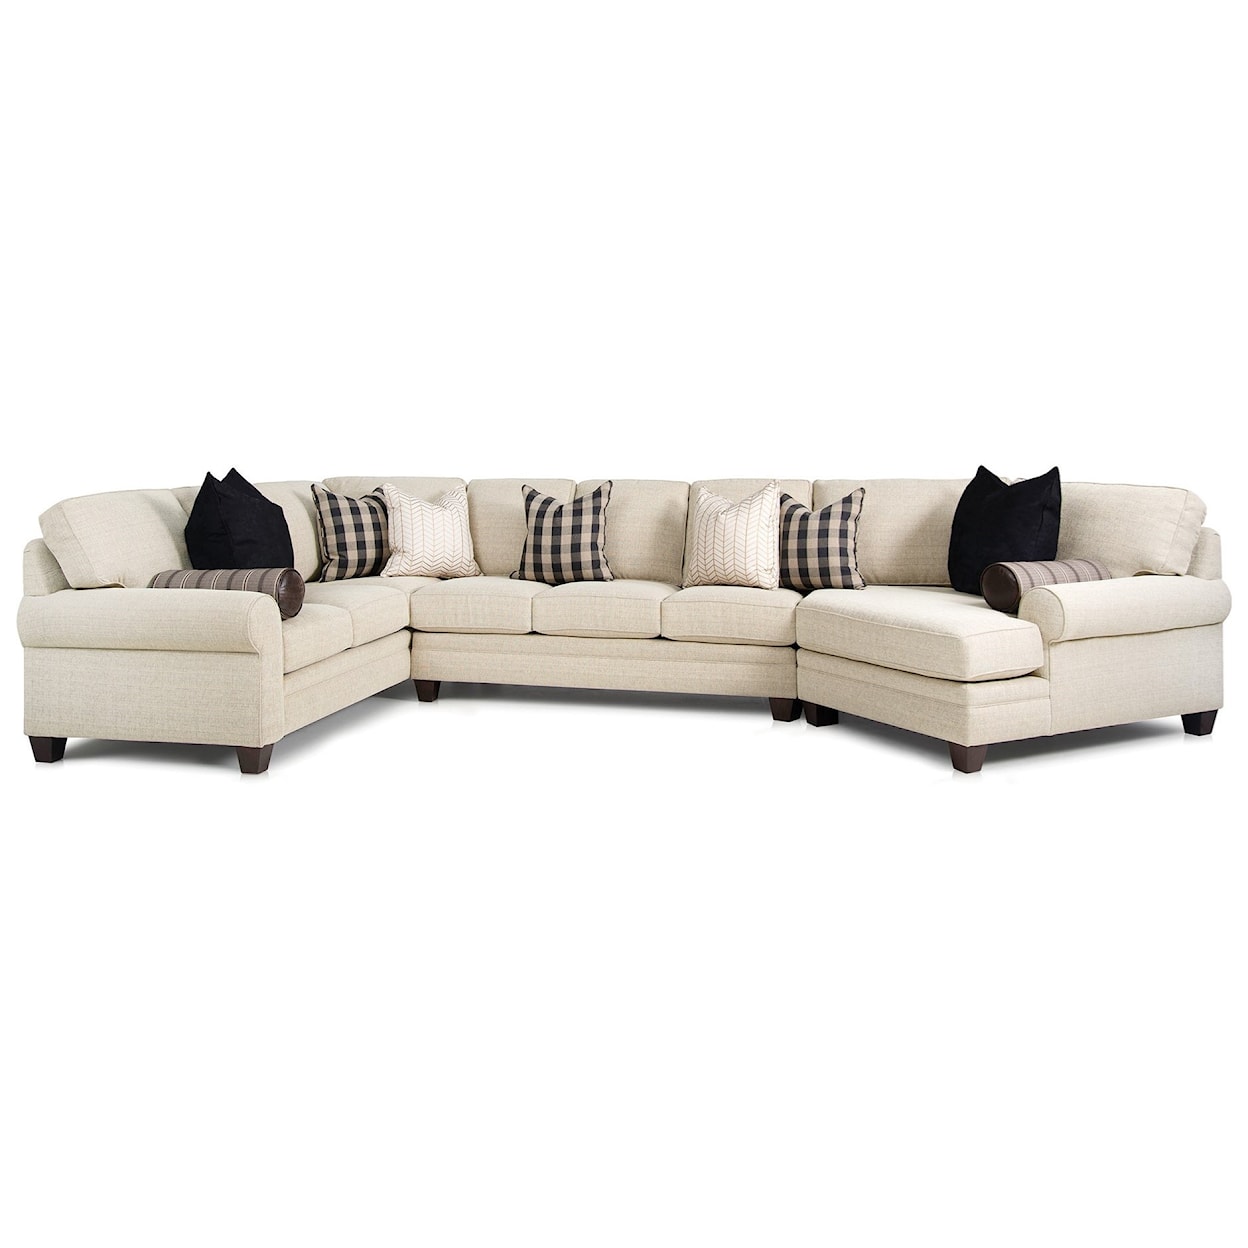 Smith Brothers Build Your Own 5000 Series Customizable Sectional